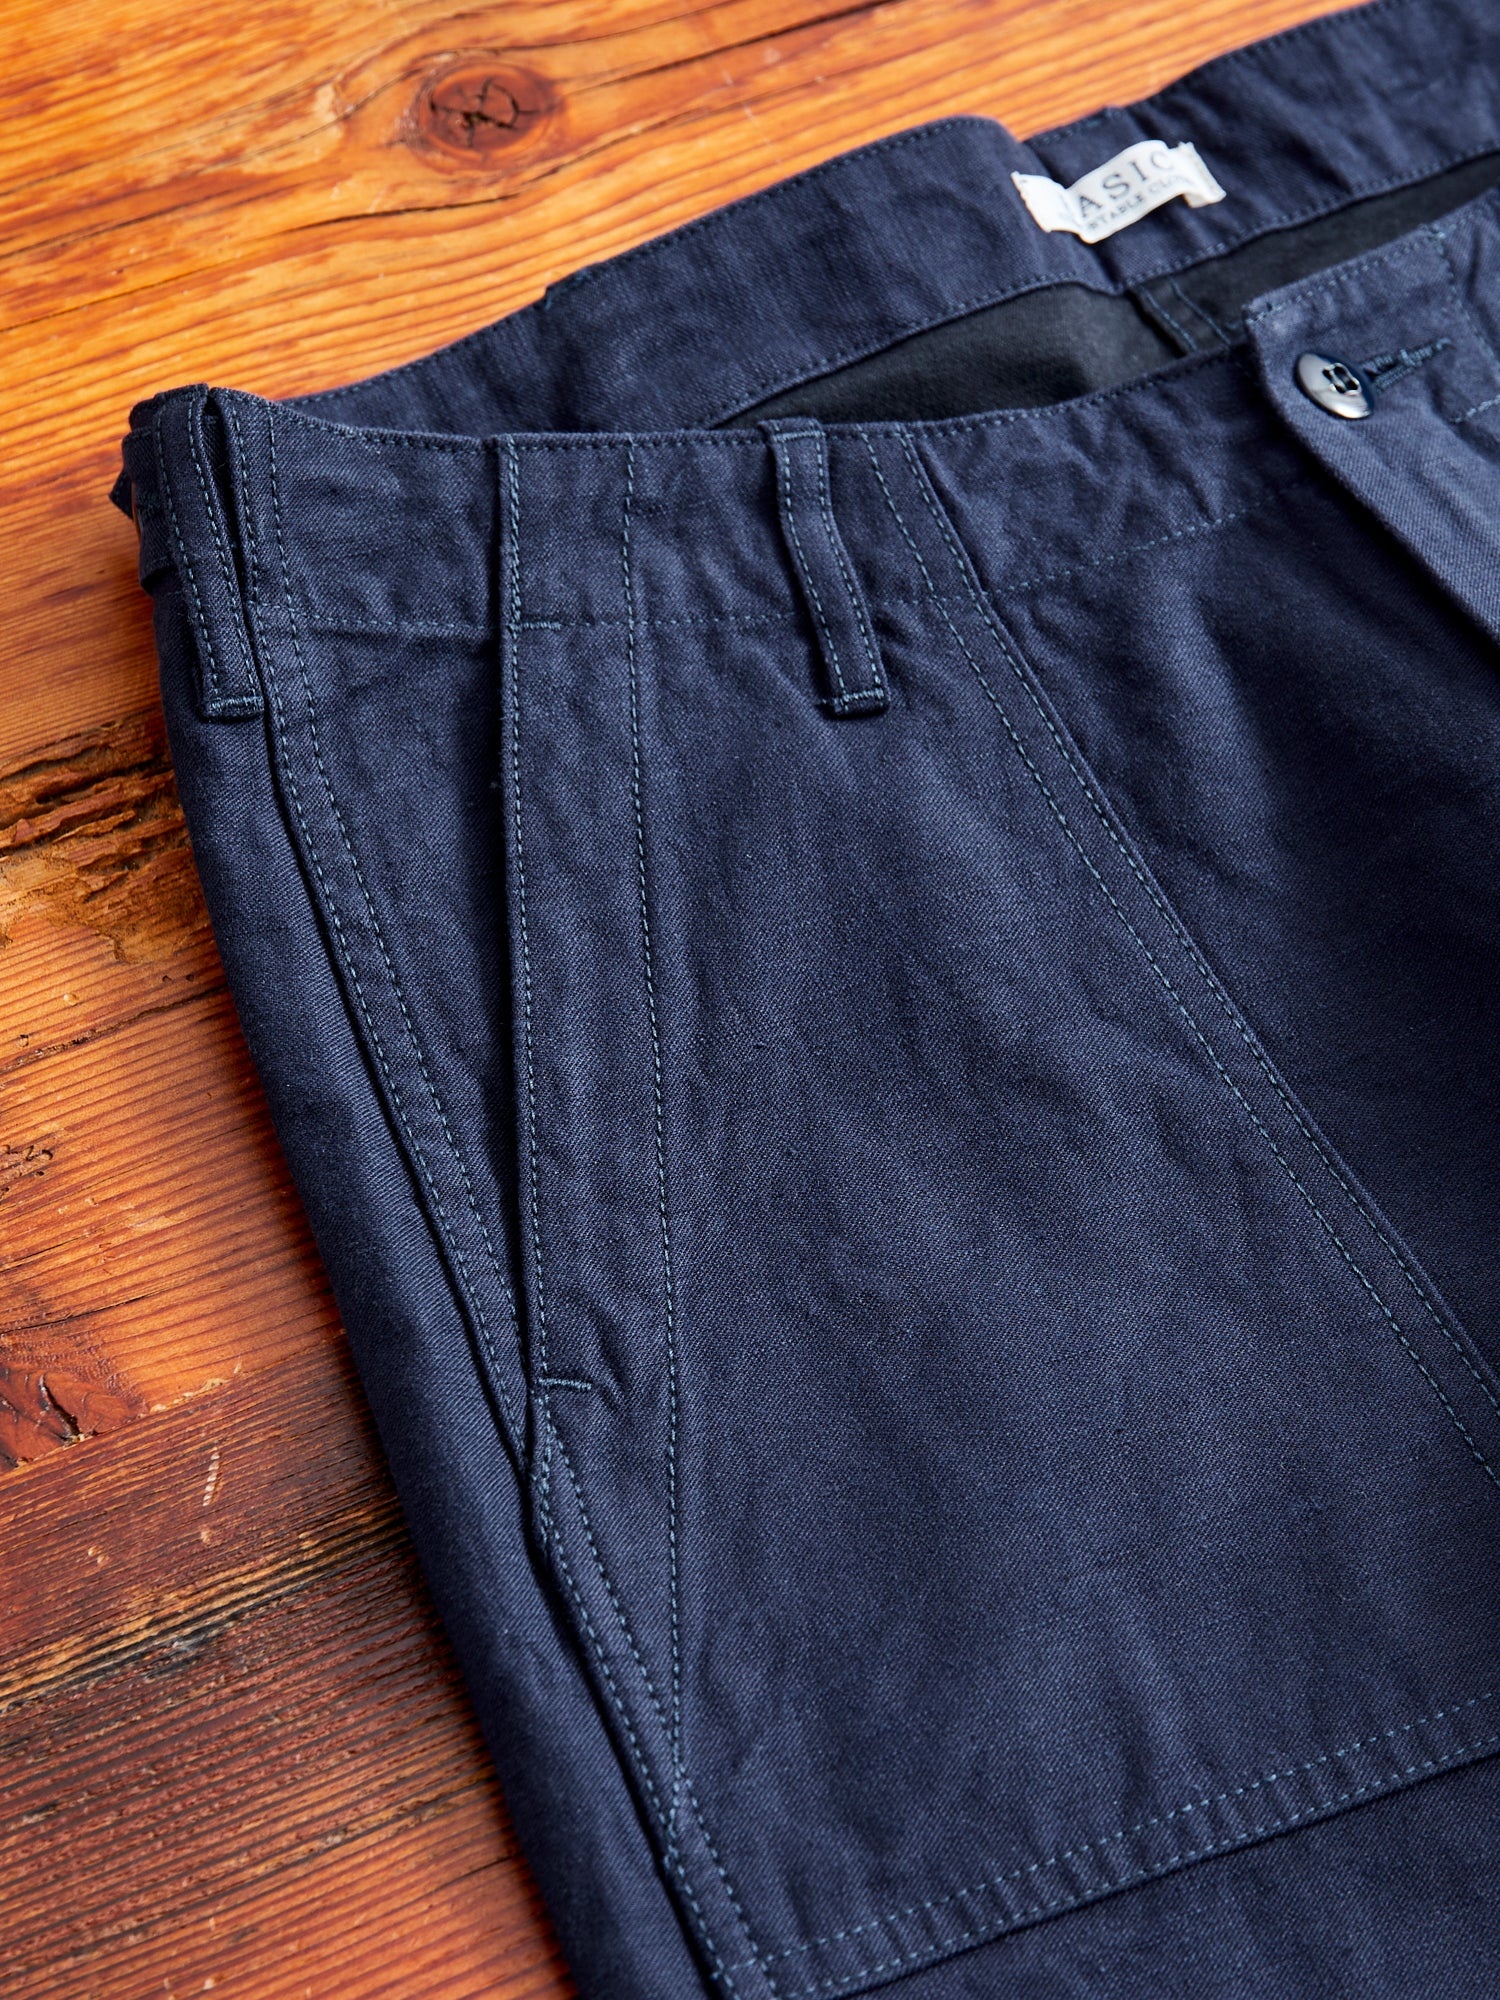 1811-IND Military Baker Pants in Indigo - 5